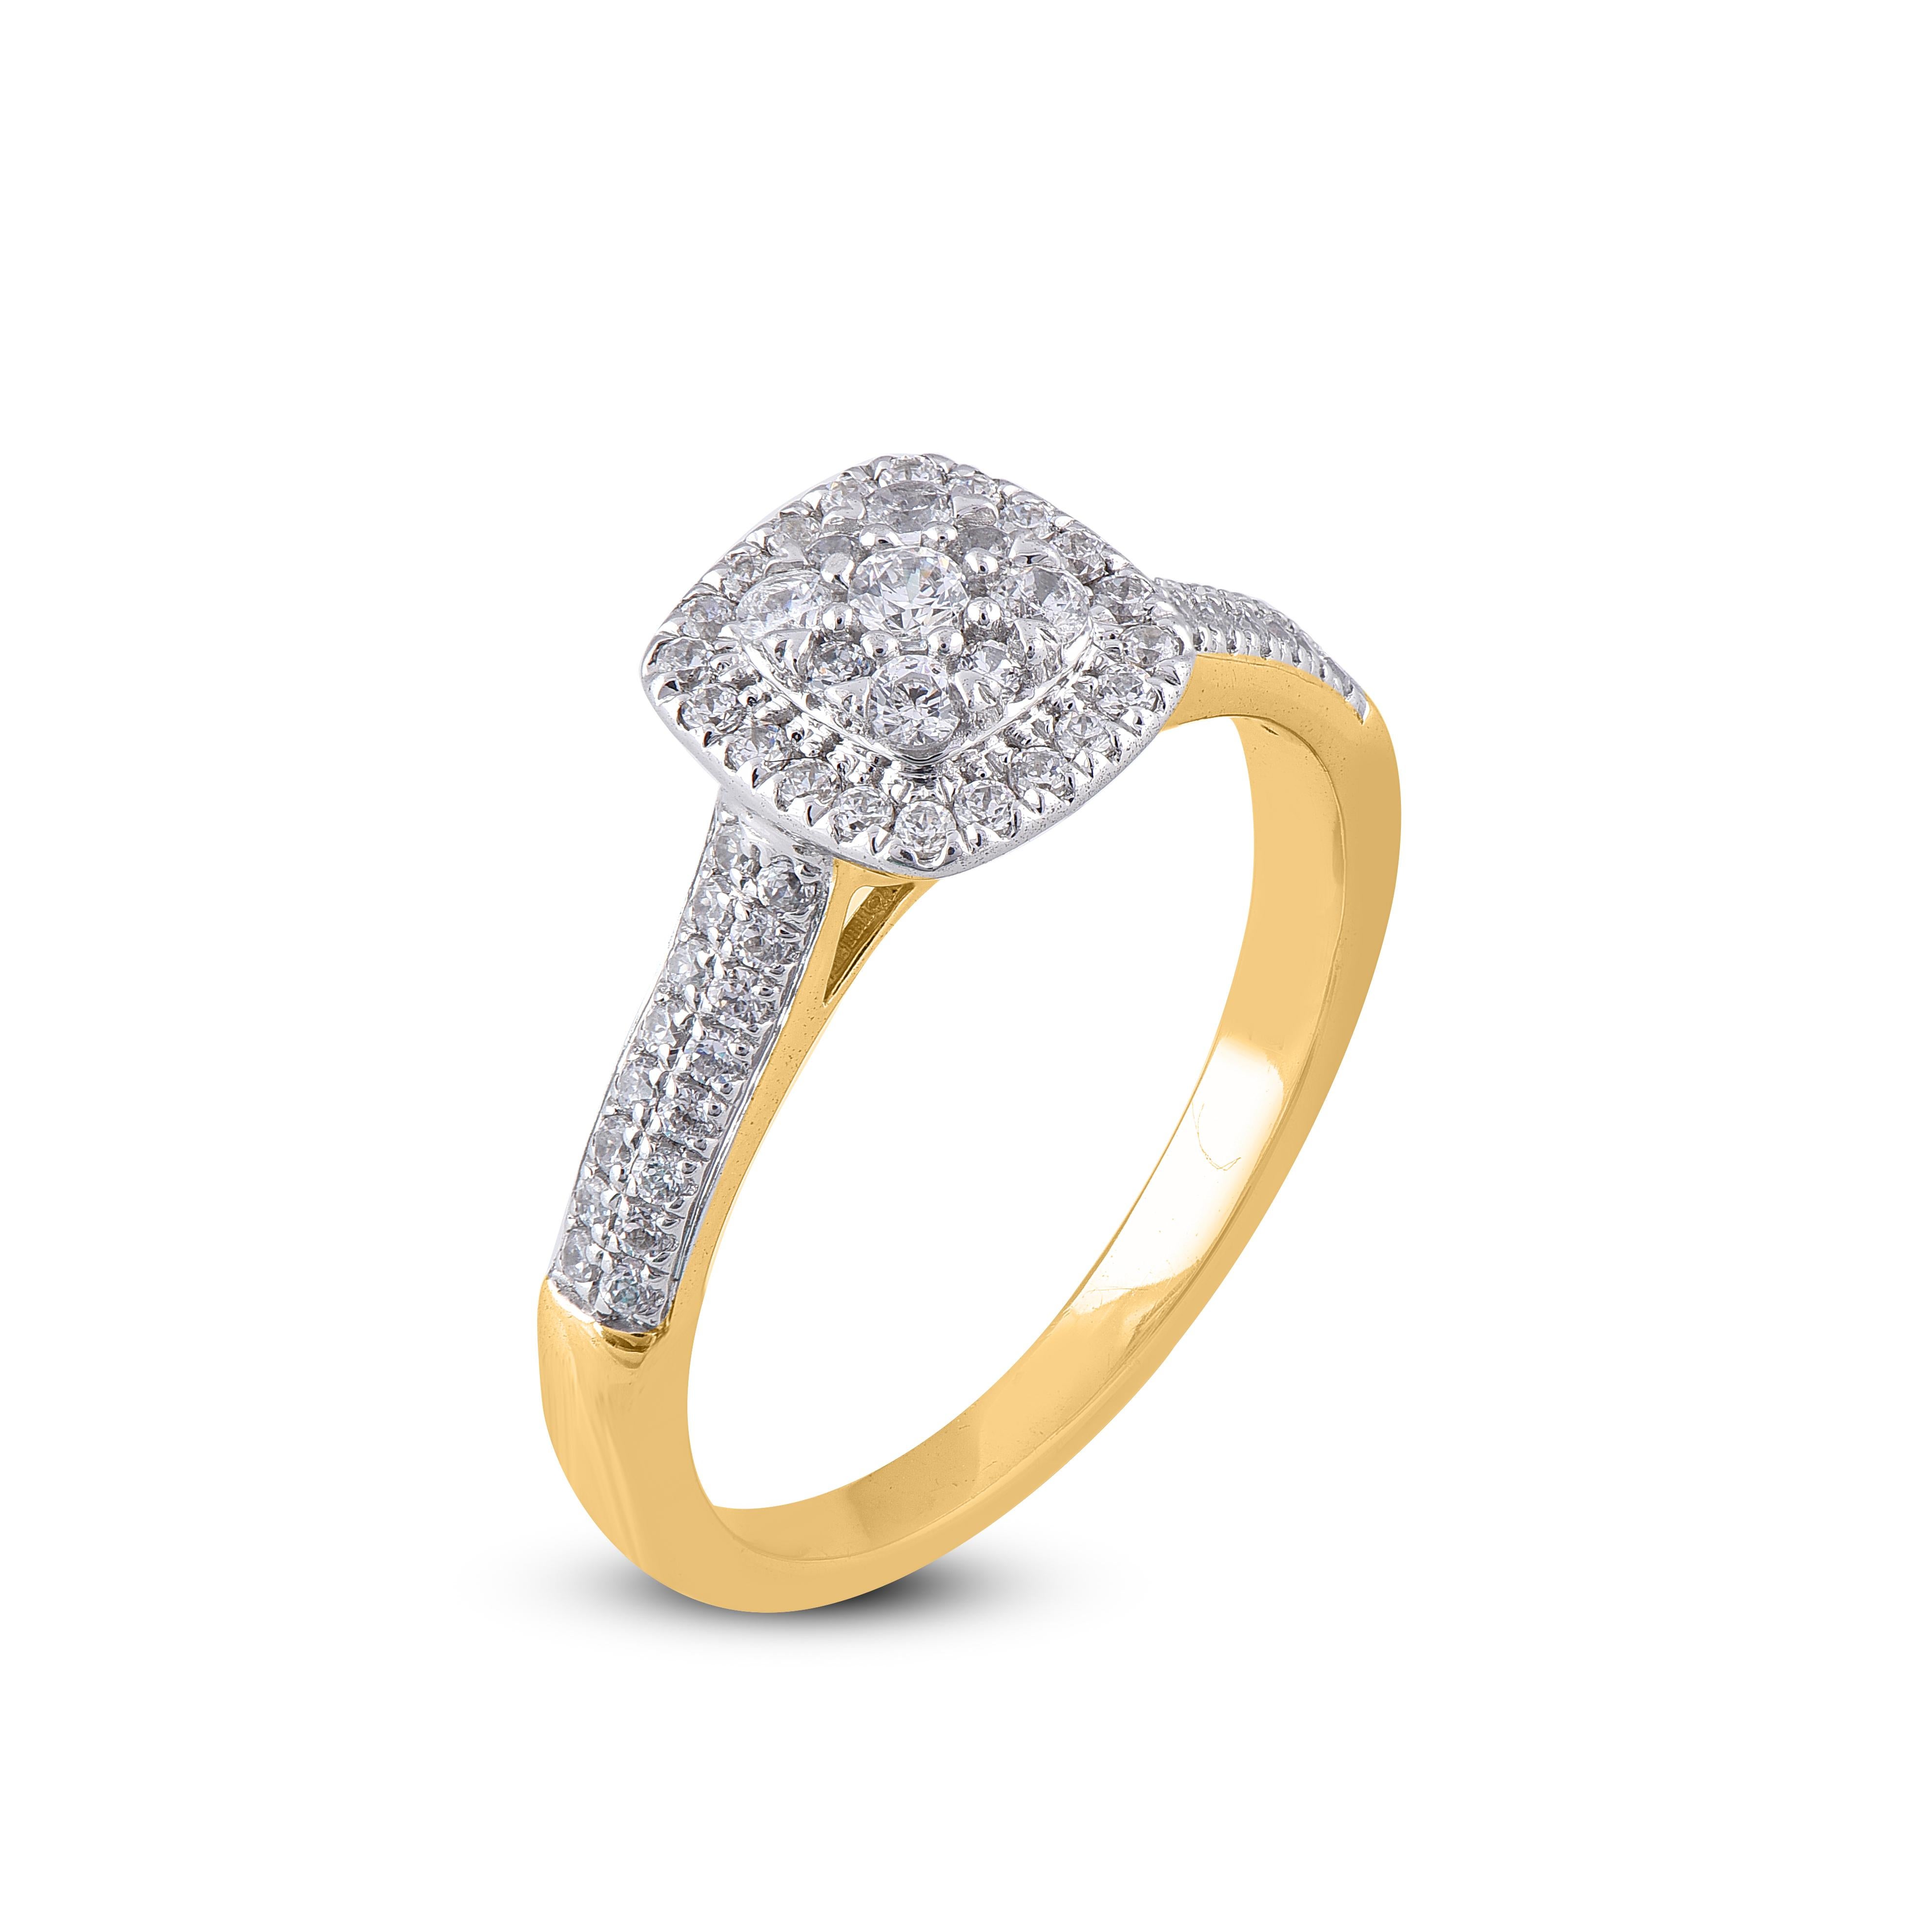 You'll adore the petite touch of shimmer these diamond engagement ring add to your attire. Beautifully hand-crafted by our inhouse experts in 14 karat yellow gold and embellished with 61 round diamonds set in prong and pave setting and shimmers with